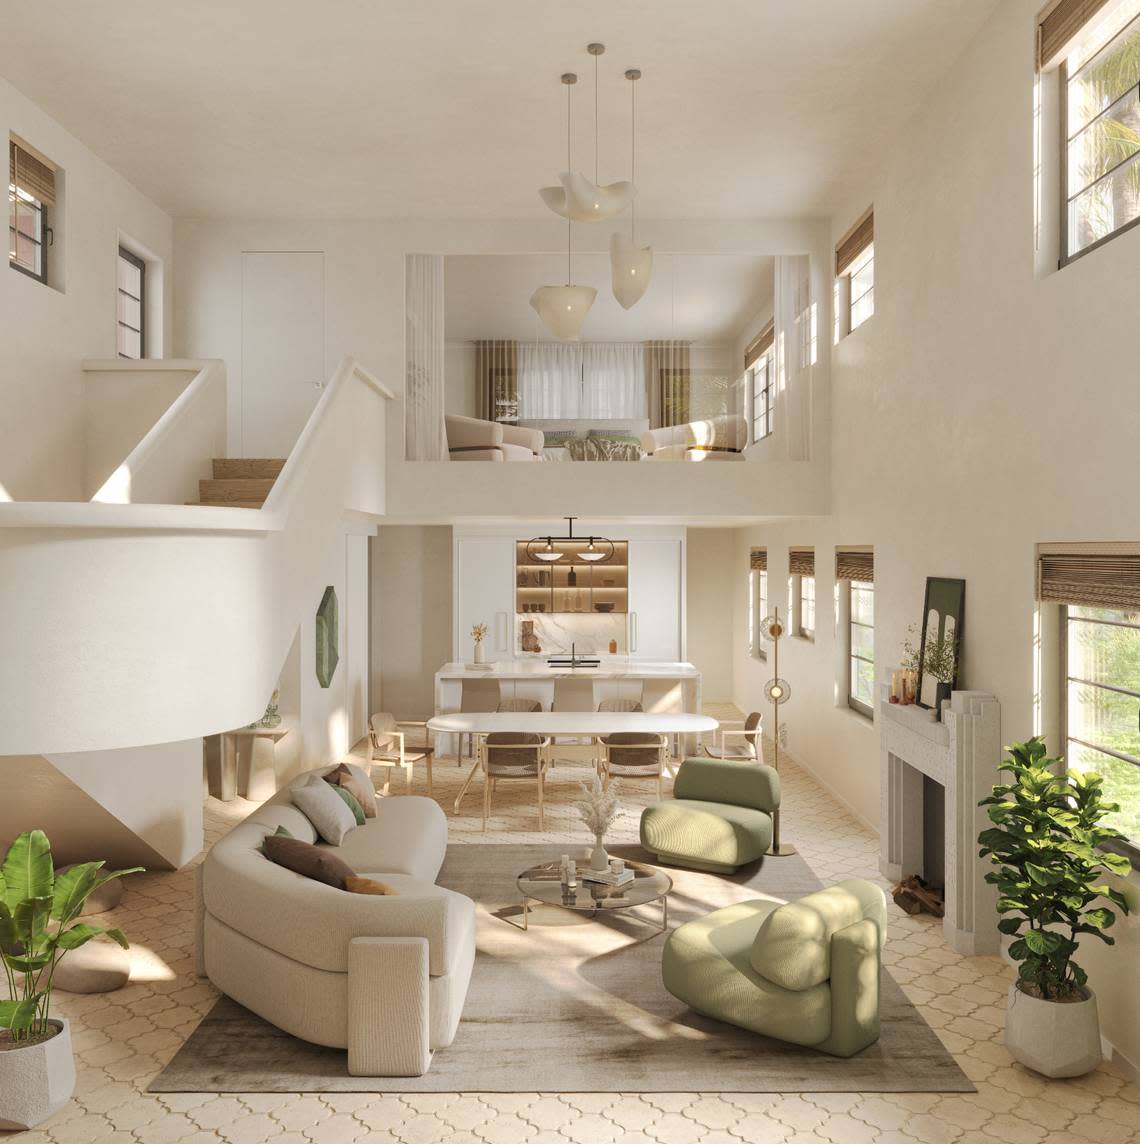 A historic 1936 apartment house on Indian Creek Drive in Miami Beach will be lifted above flood levels and restored as part of a luxury condo redevelopment project. Here&#x002019;s a rendering of the interior of one of the new townhomes planned as part of the project.